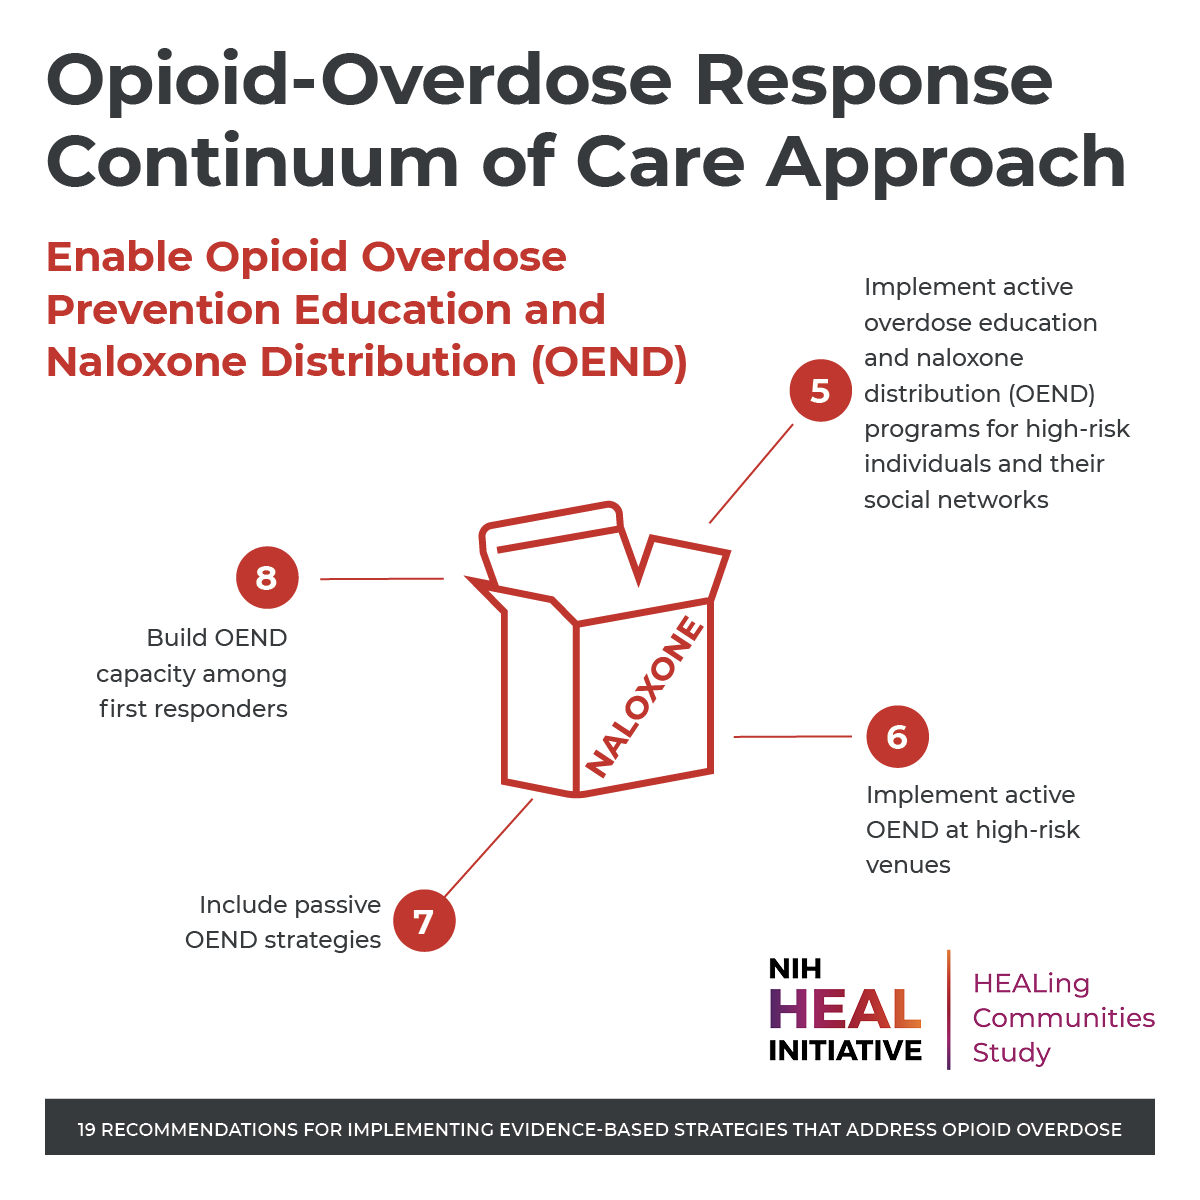 prevention education and naloxone distribution